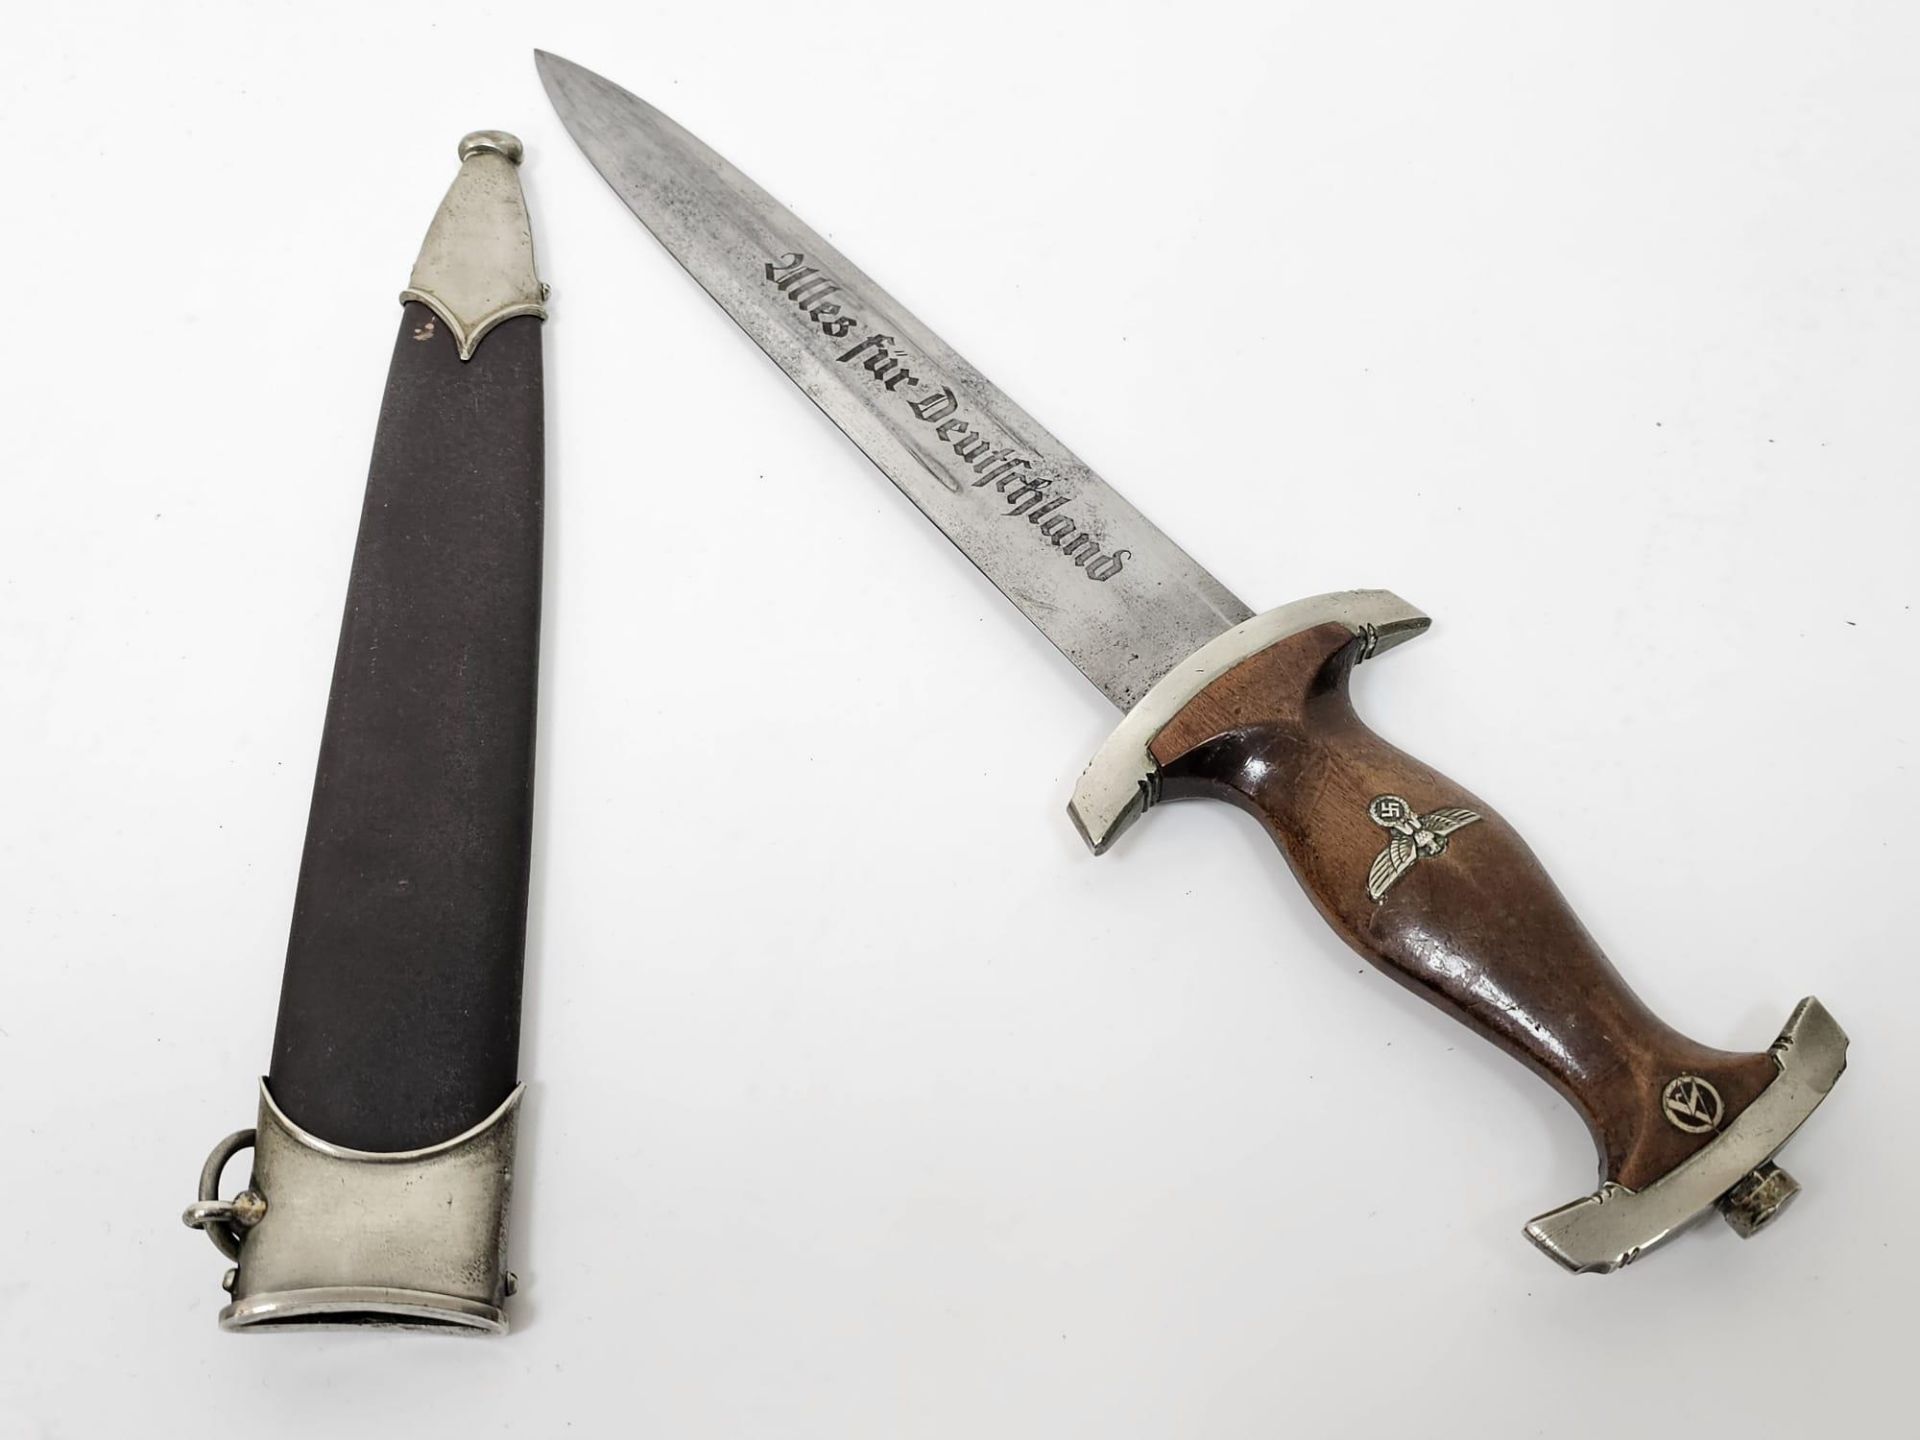 3rd Reich SA Dagger. Nice early 1933 example made by Anton Wingen Jr Solingen. Gau Marked “NO” for